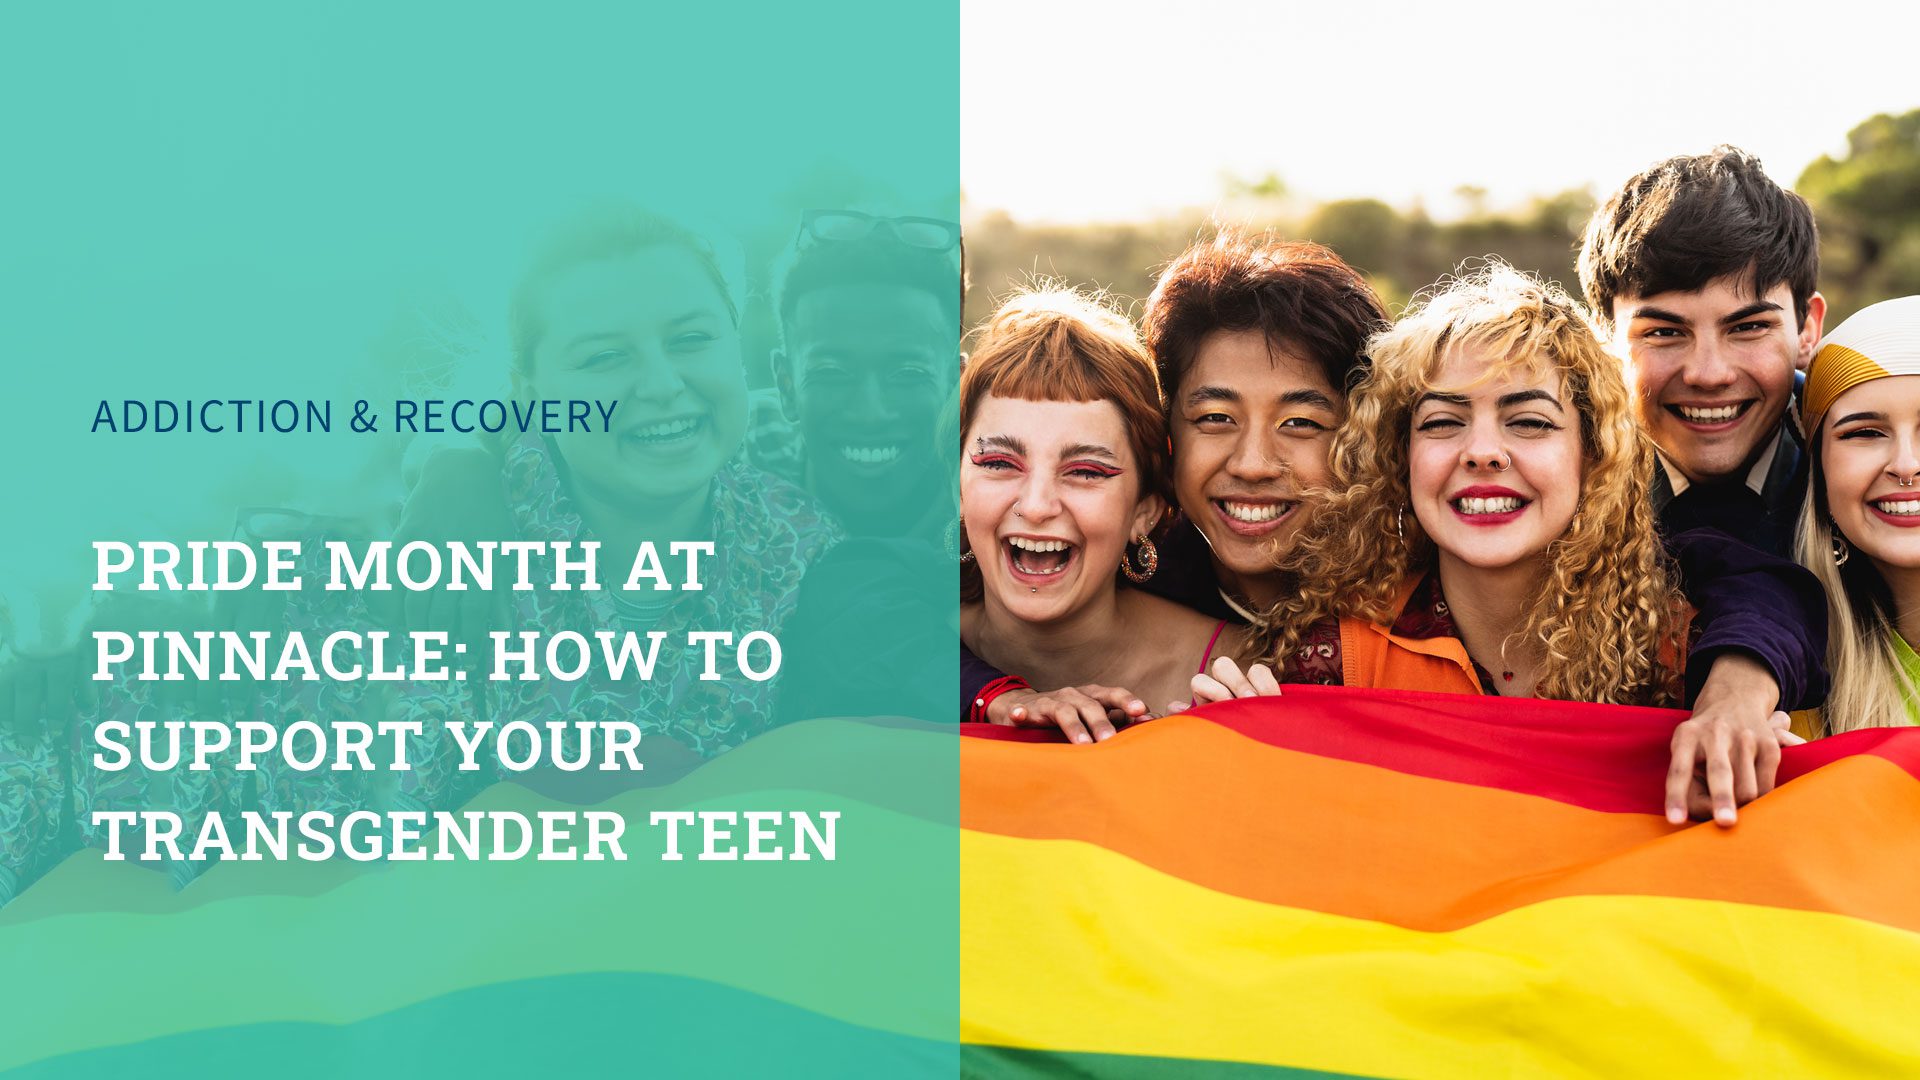 Photo of group of teens with pride/rainbow flag